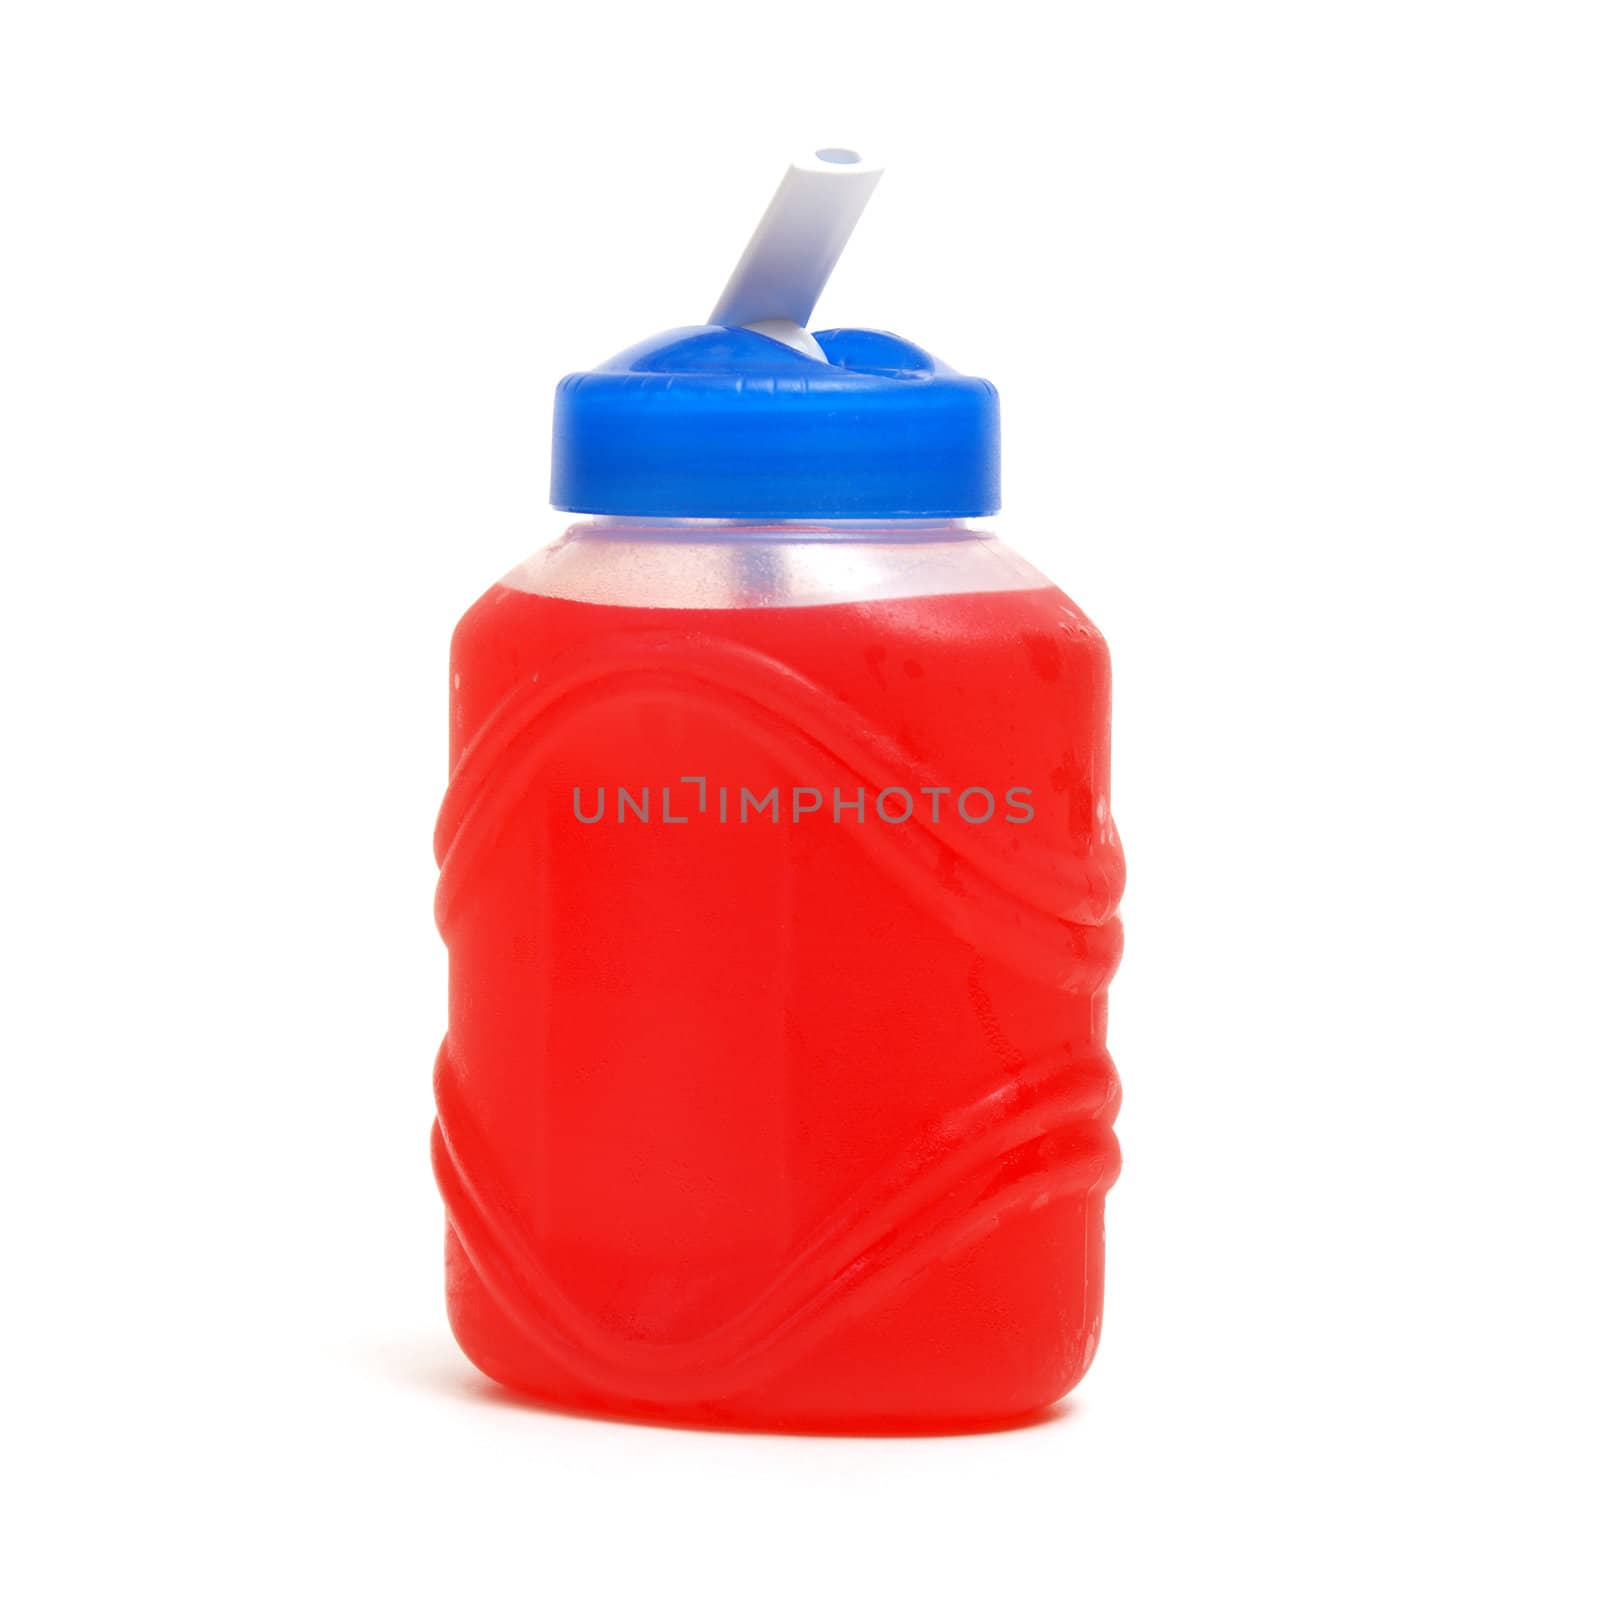 A red fruit drink in a reusable container to take with you to work or school.